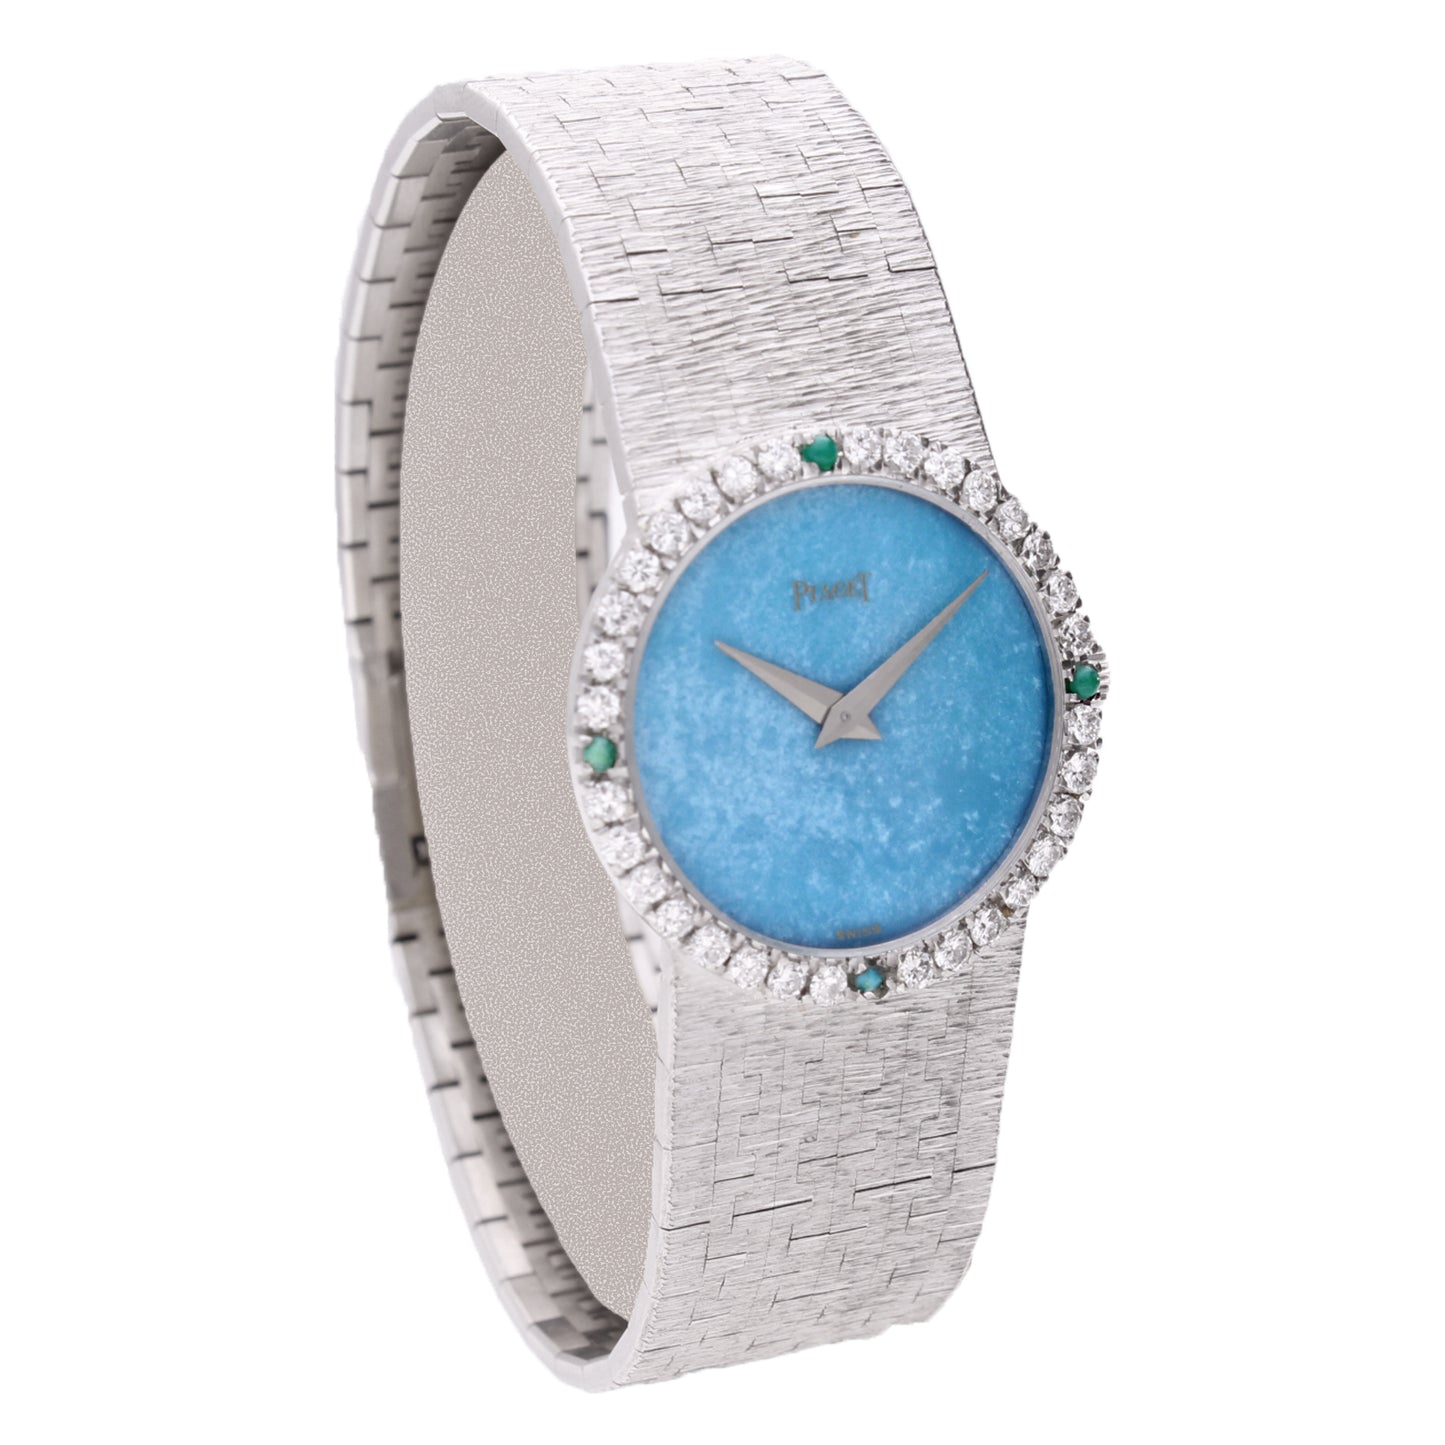 18ct white gold Piaget, reference 9706 barcelet watch with Turquoise dial and diamond set bezel. Made 1970's